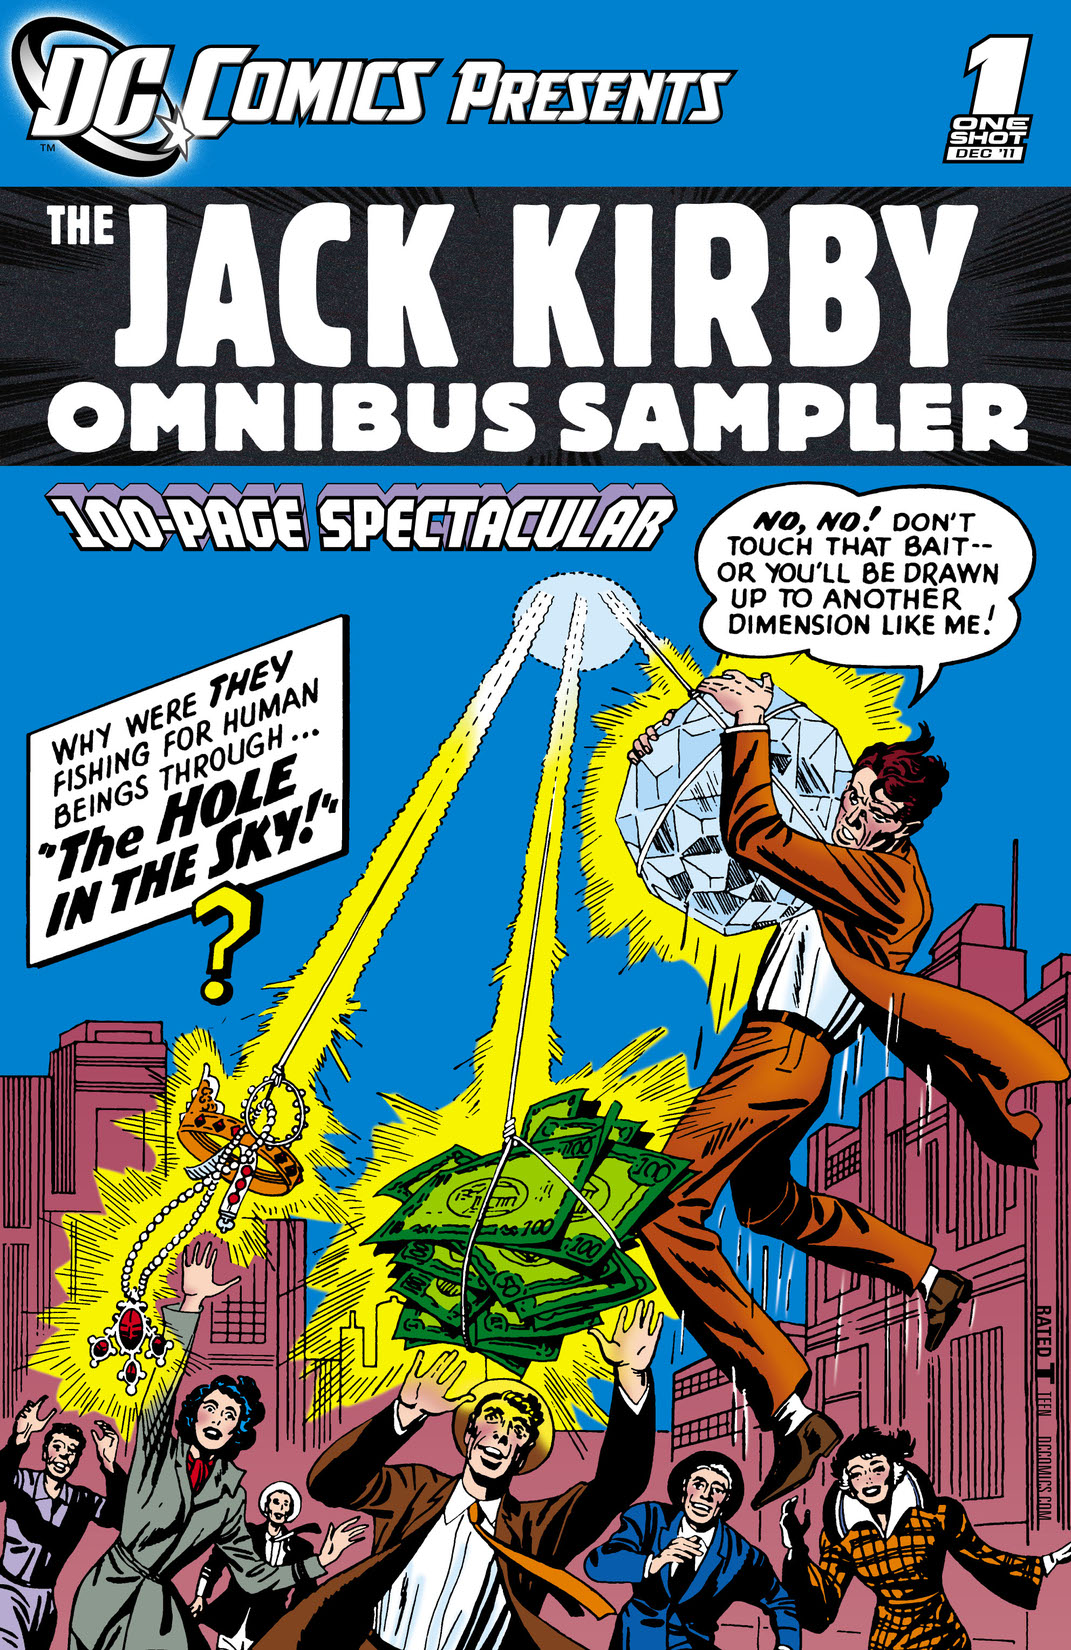 DC Comics Presents: The Jack Kirby Omnibus Sampler (2011-) #1 preview images